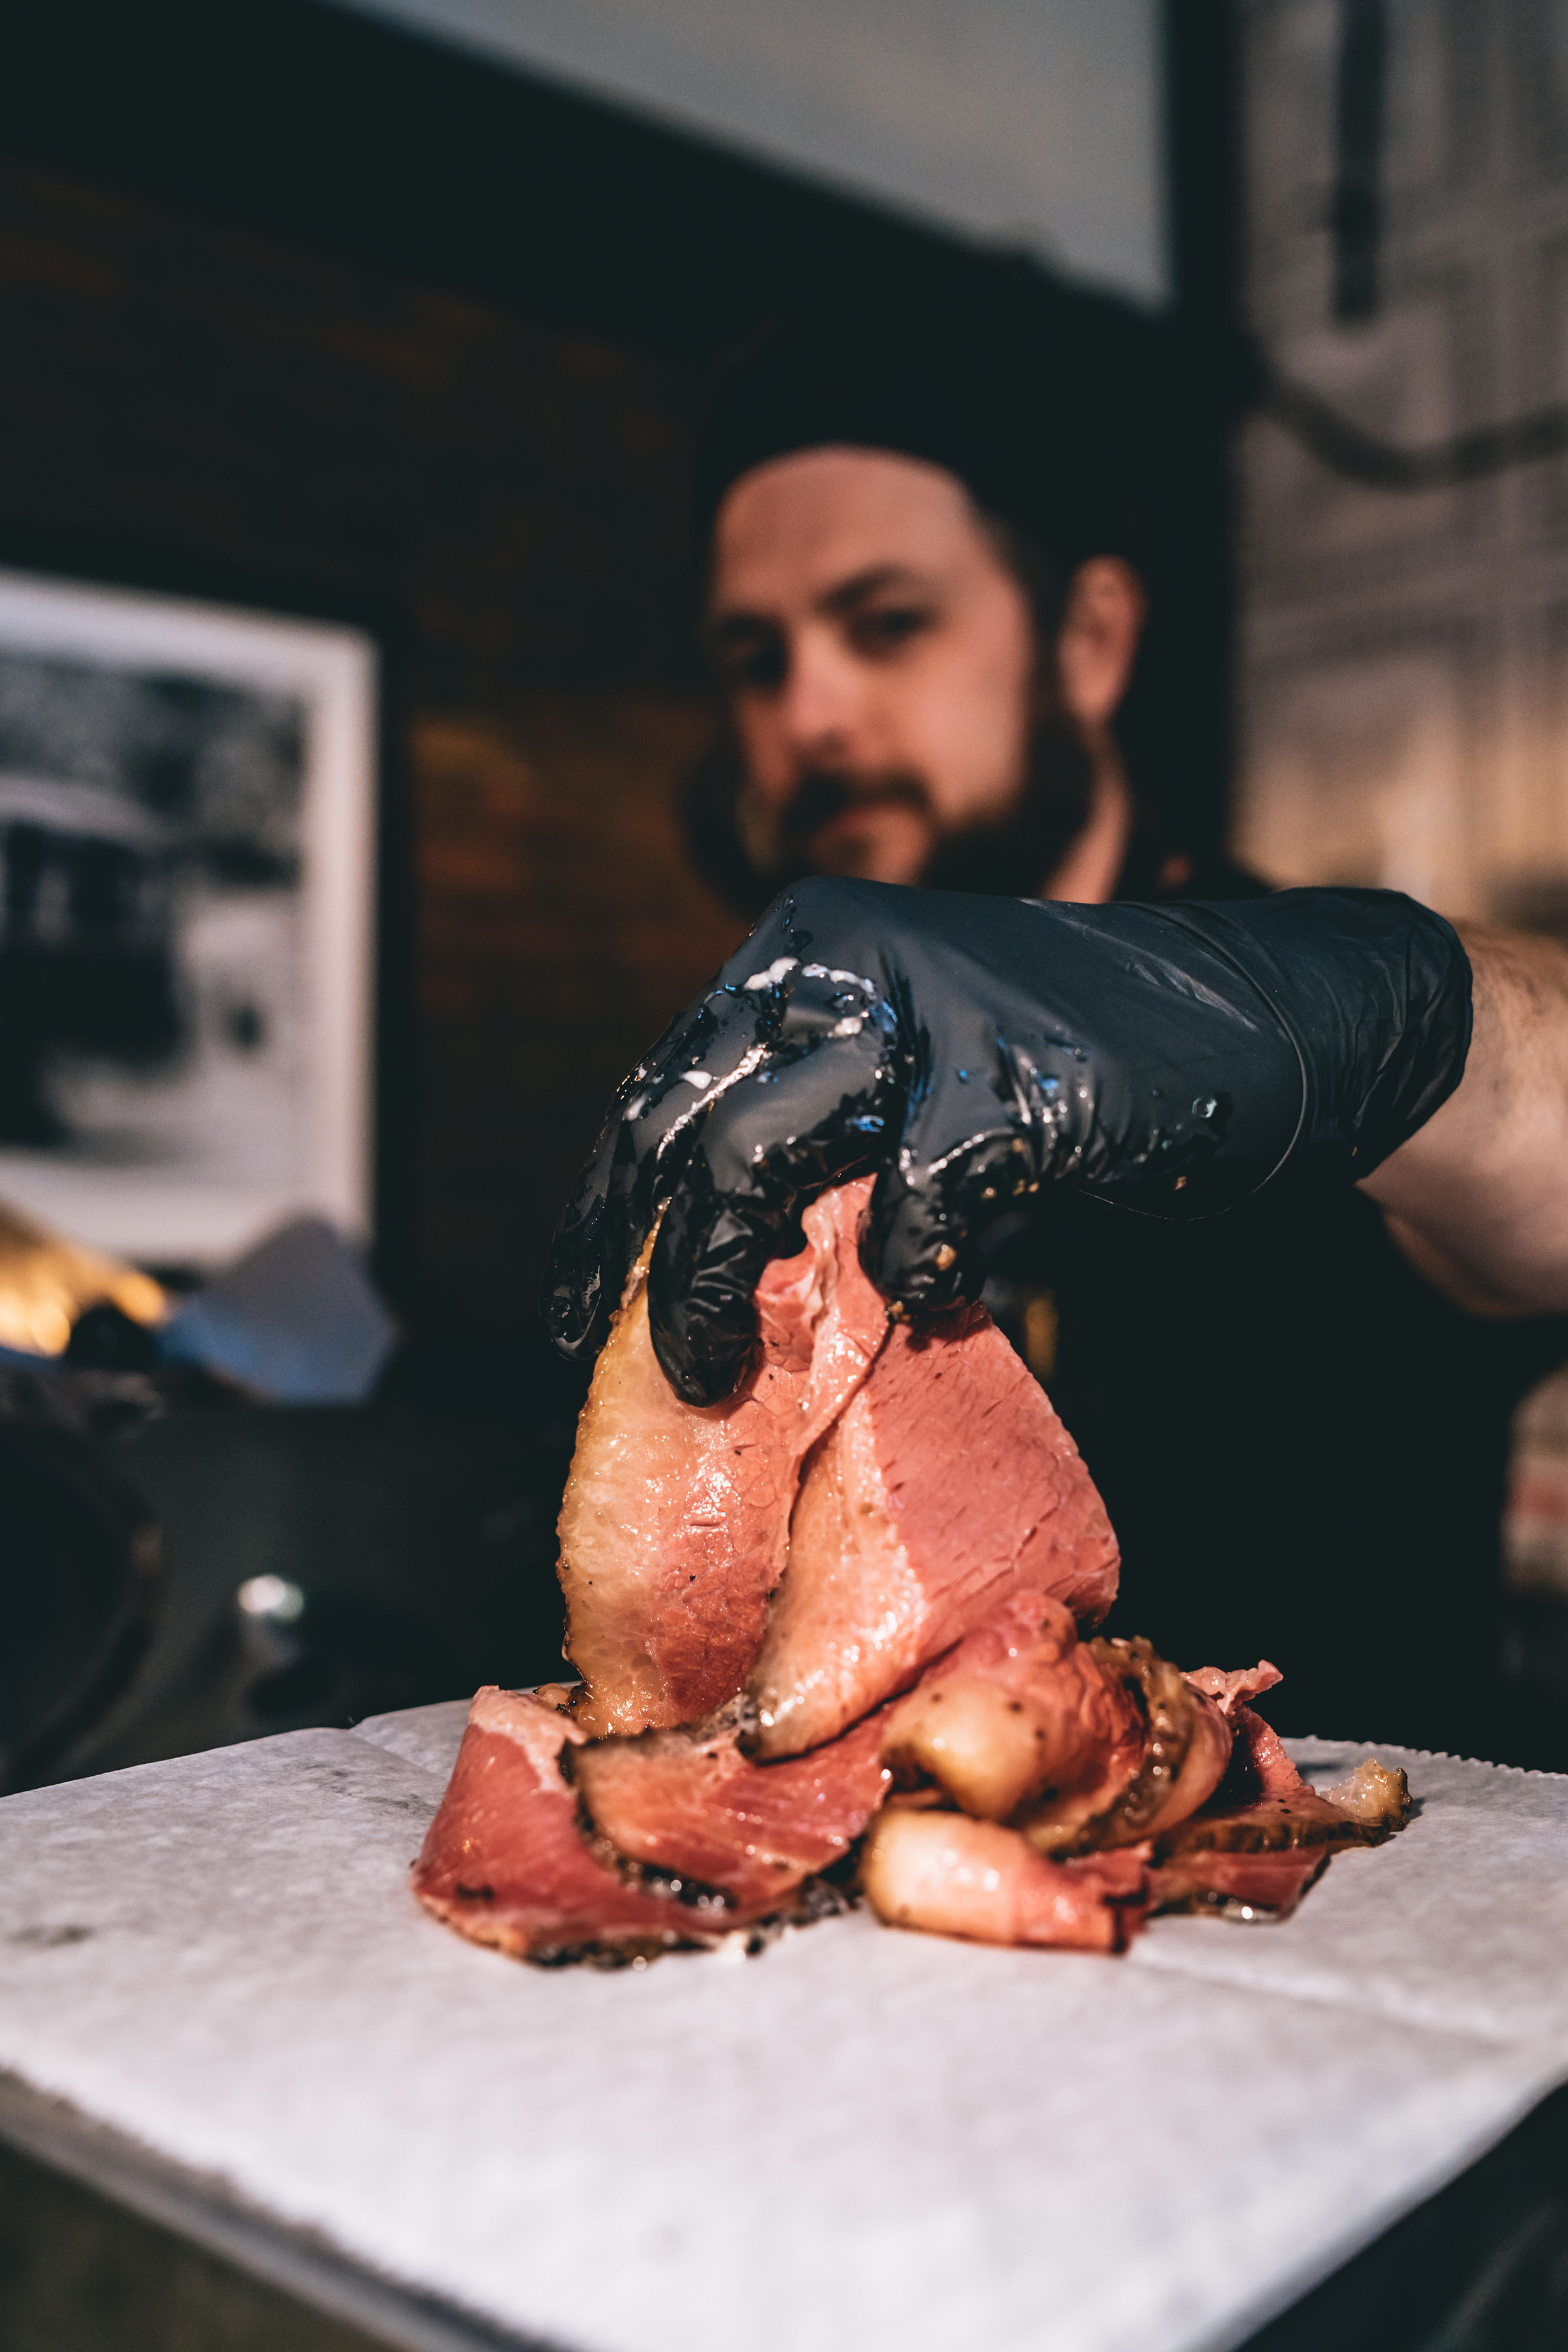 A Mead St. Provisions employee holds a fresh cut of meat with a gloved hand